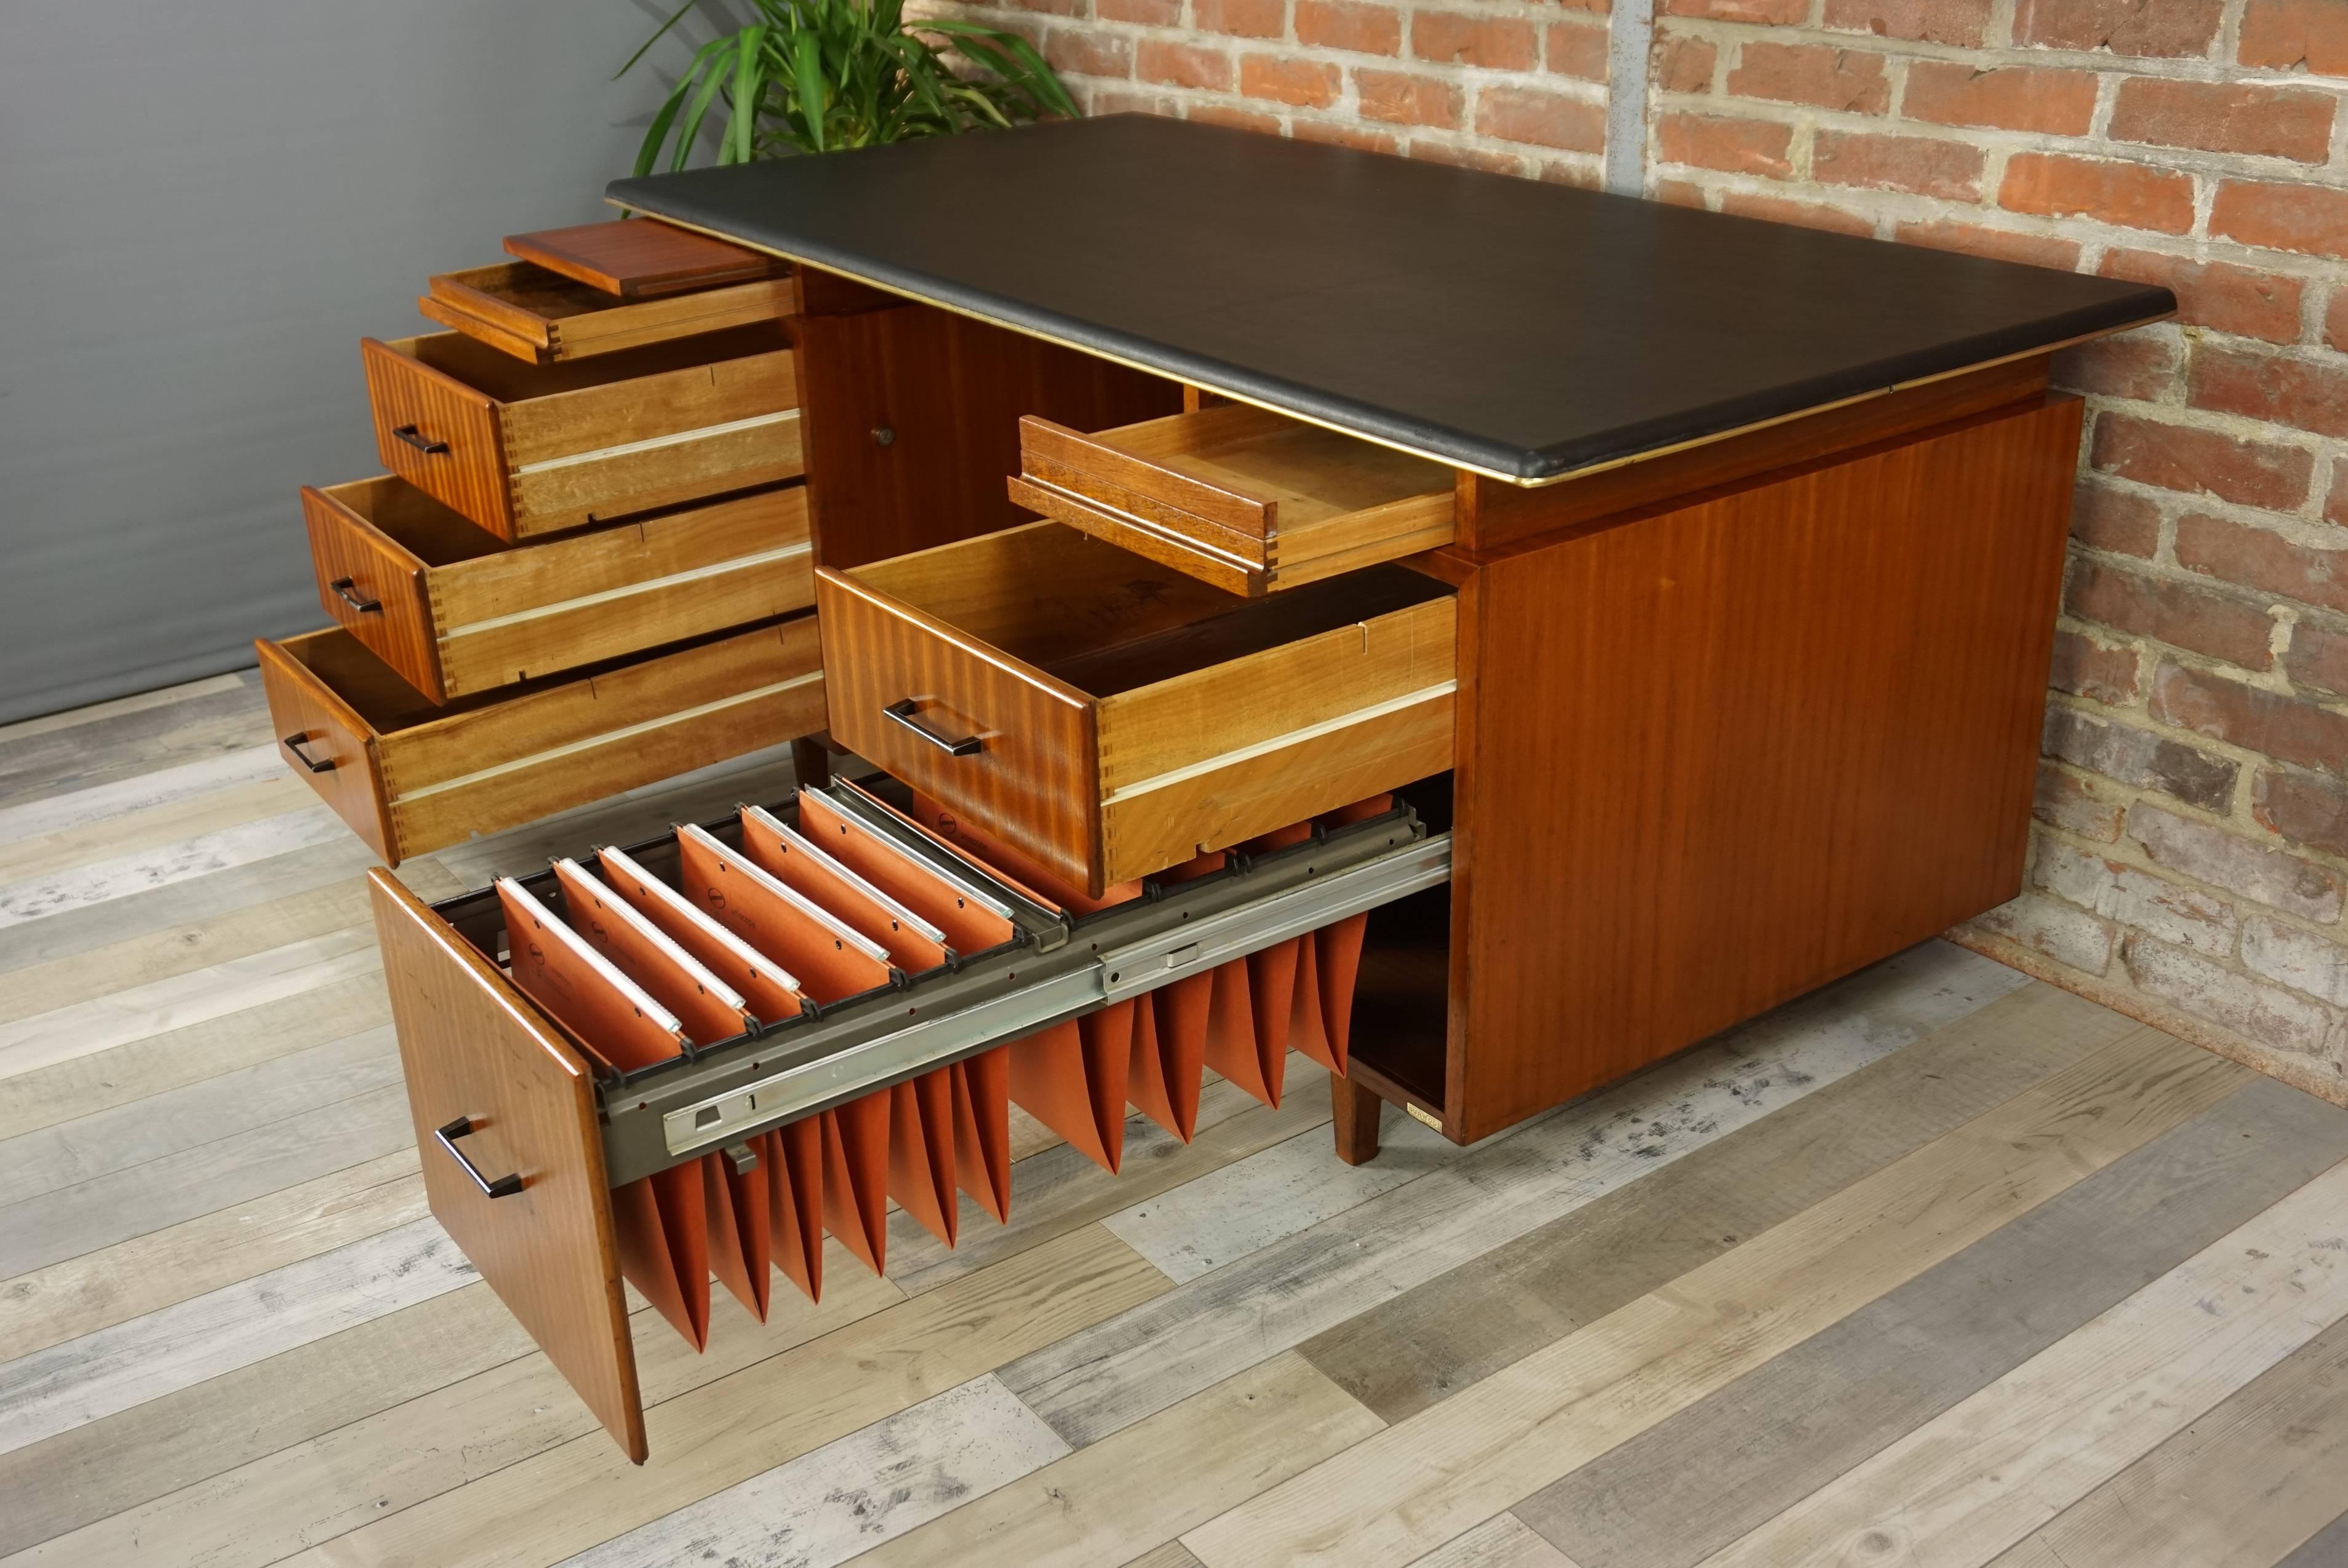 French Design Teak Wooden and Black Executive Desk from the 1950s by Burwood 2